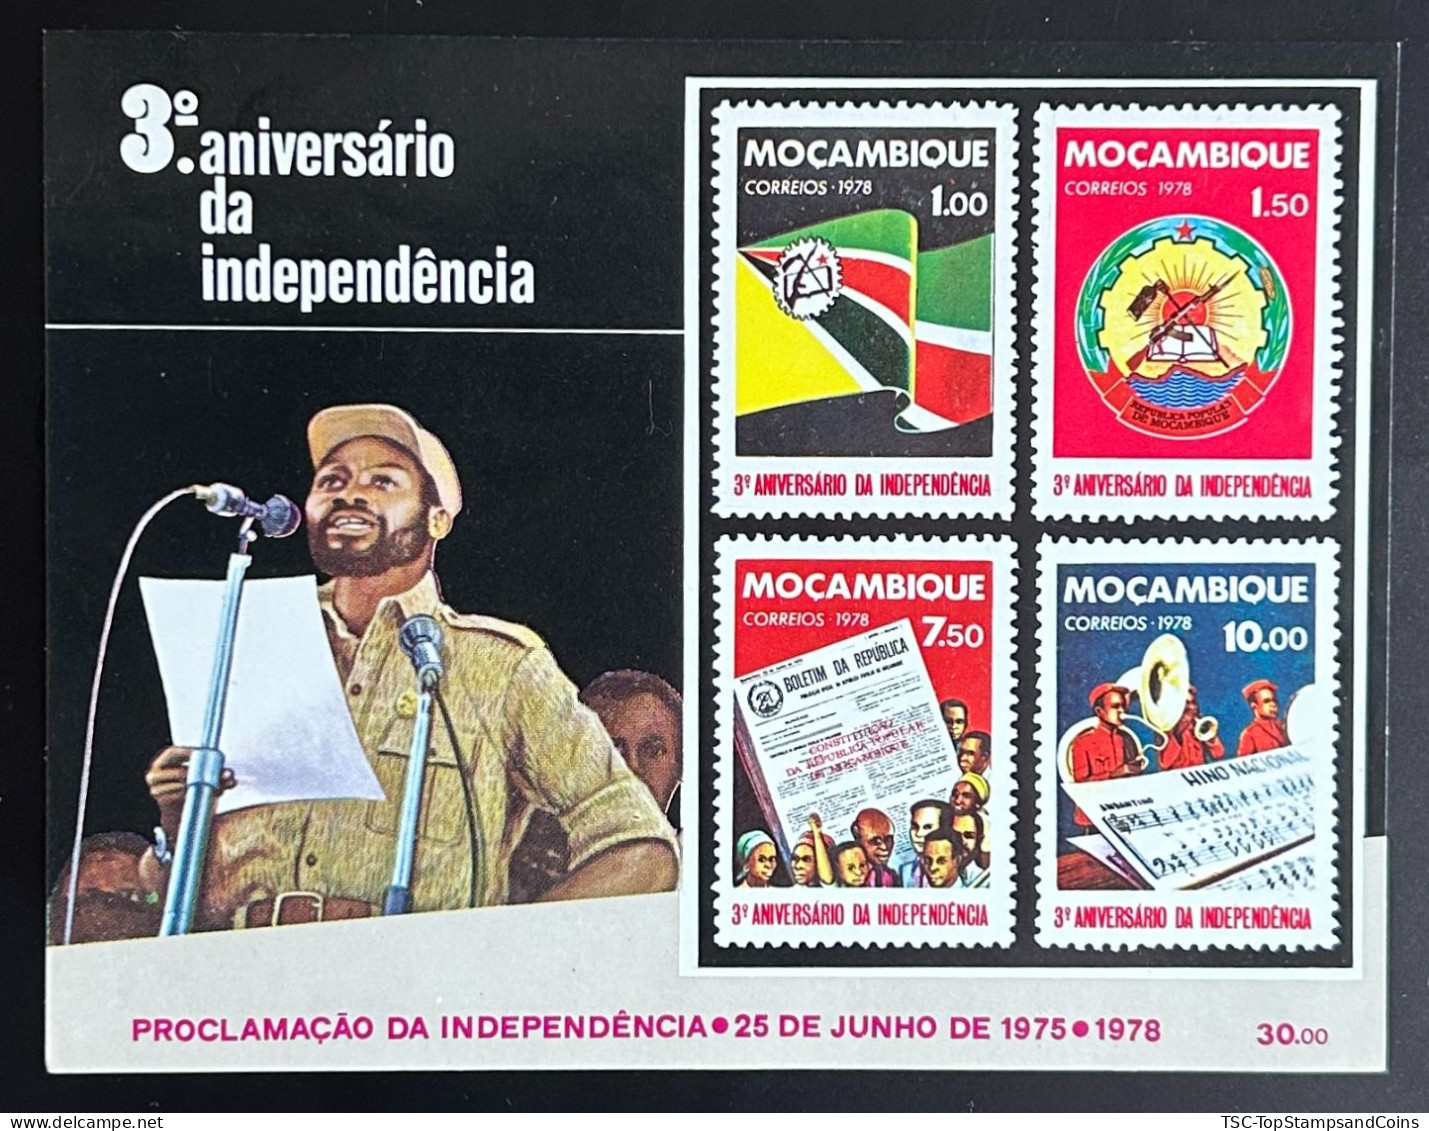 MOZ0658-61MNHBS - 3rd. Anniversary Of Independence - Non Perforated Minisheet - Mozambique - 1978 - Mozambique